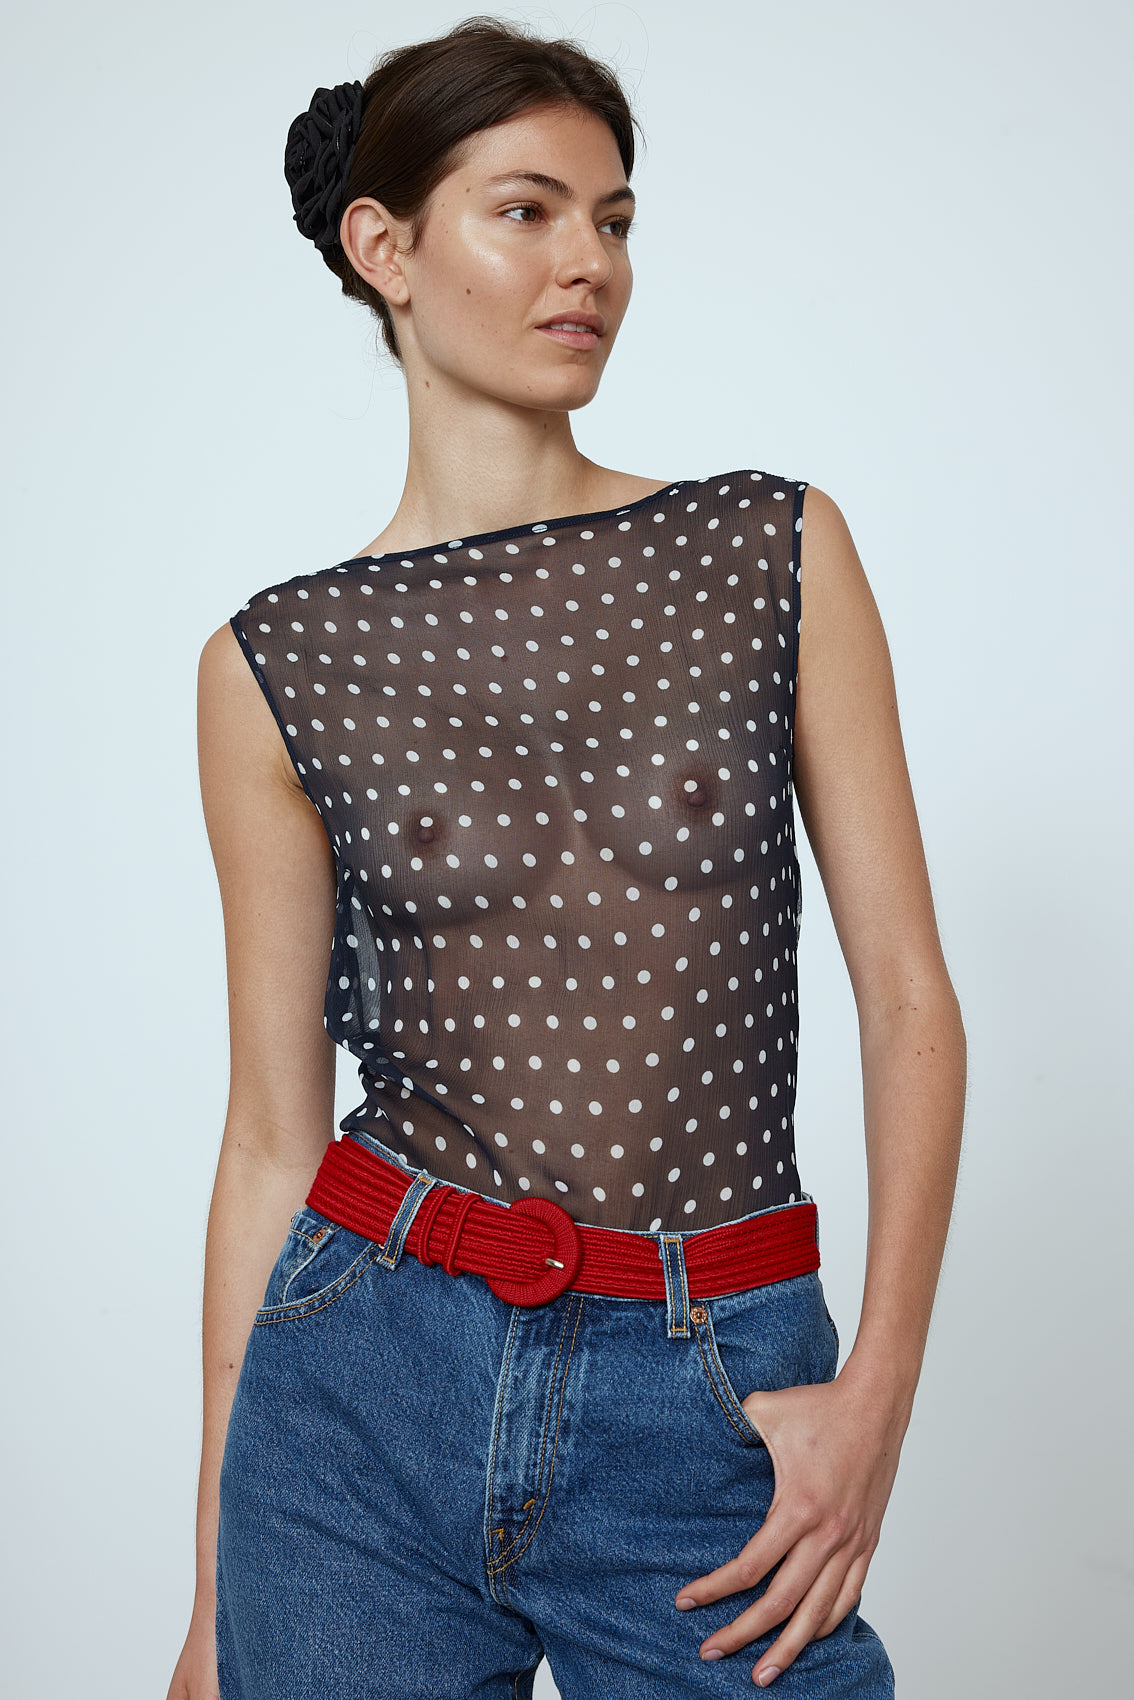 Alexa Top in Black Polka Dot Transparent Silk Chiffon. The top features a straight neckline and a deep plunging back.   Material: 100% mulberry silk.